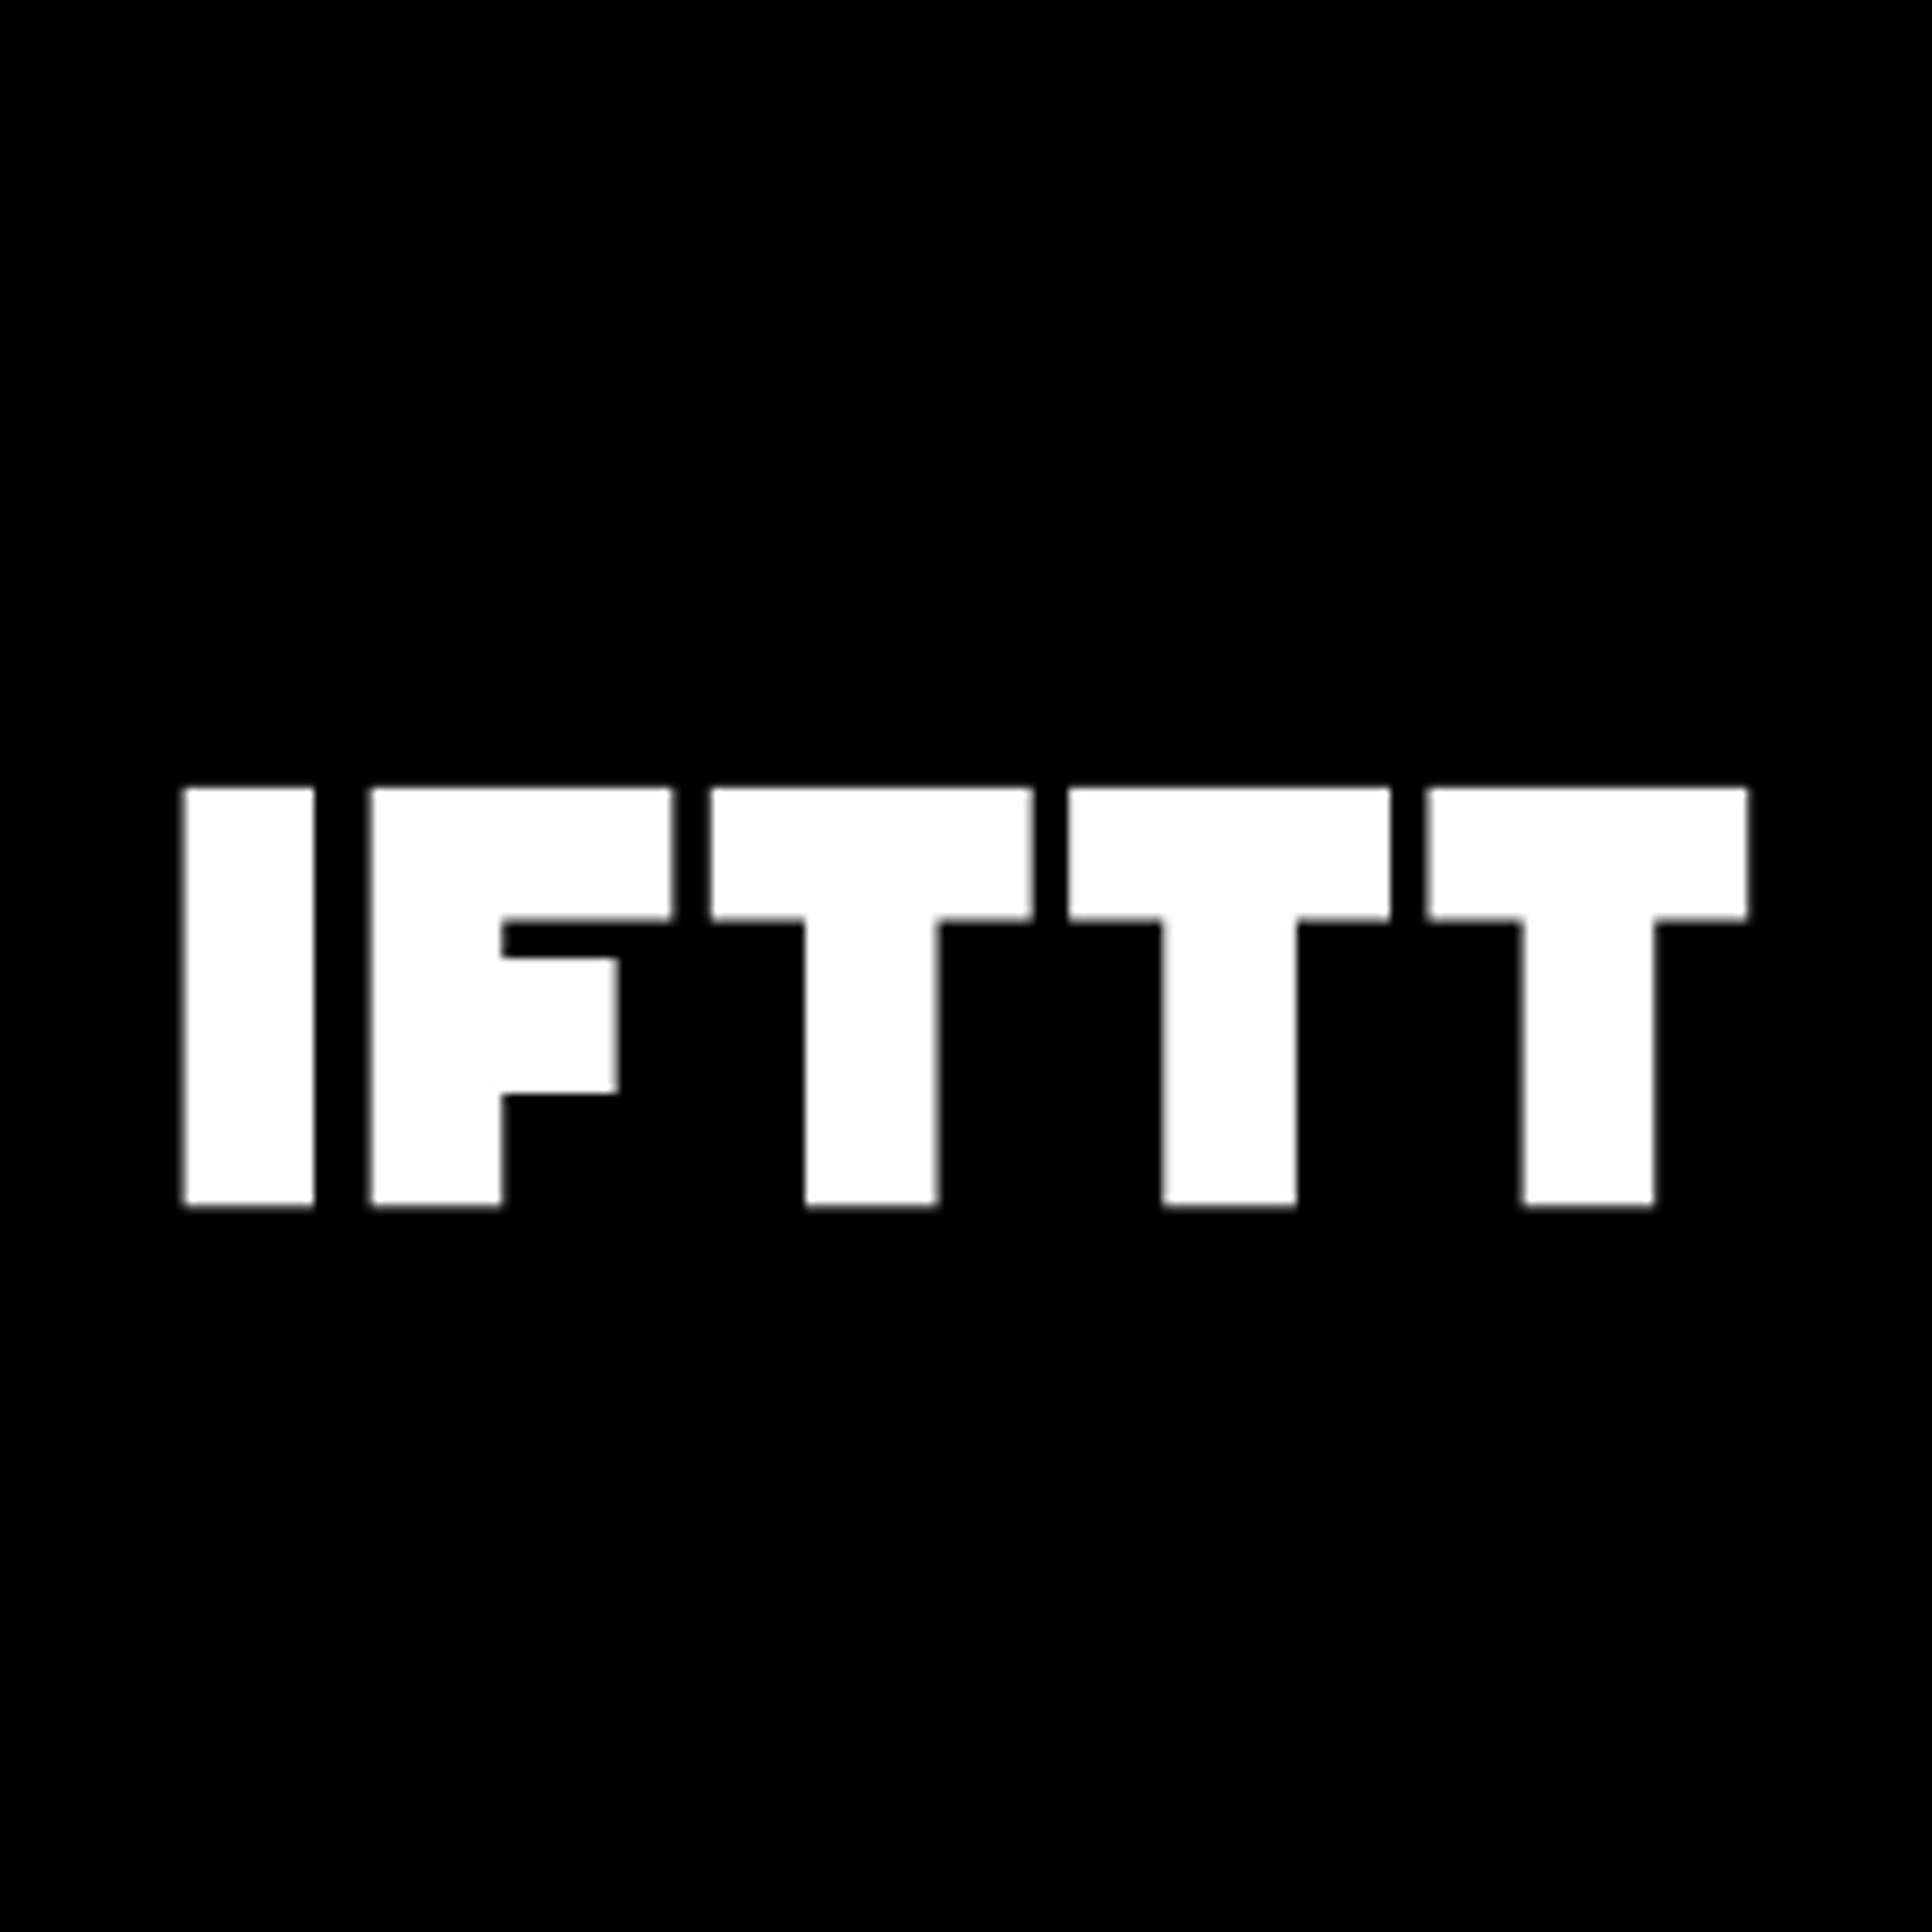 IFTTT - Connect Your Apps